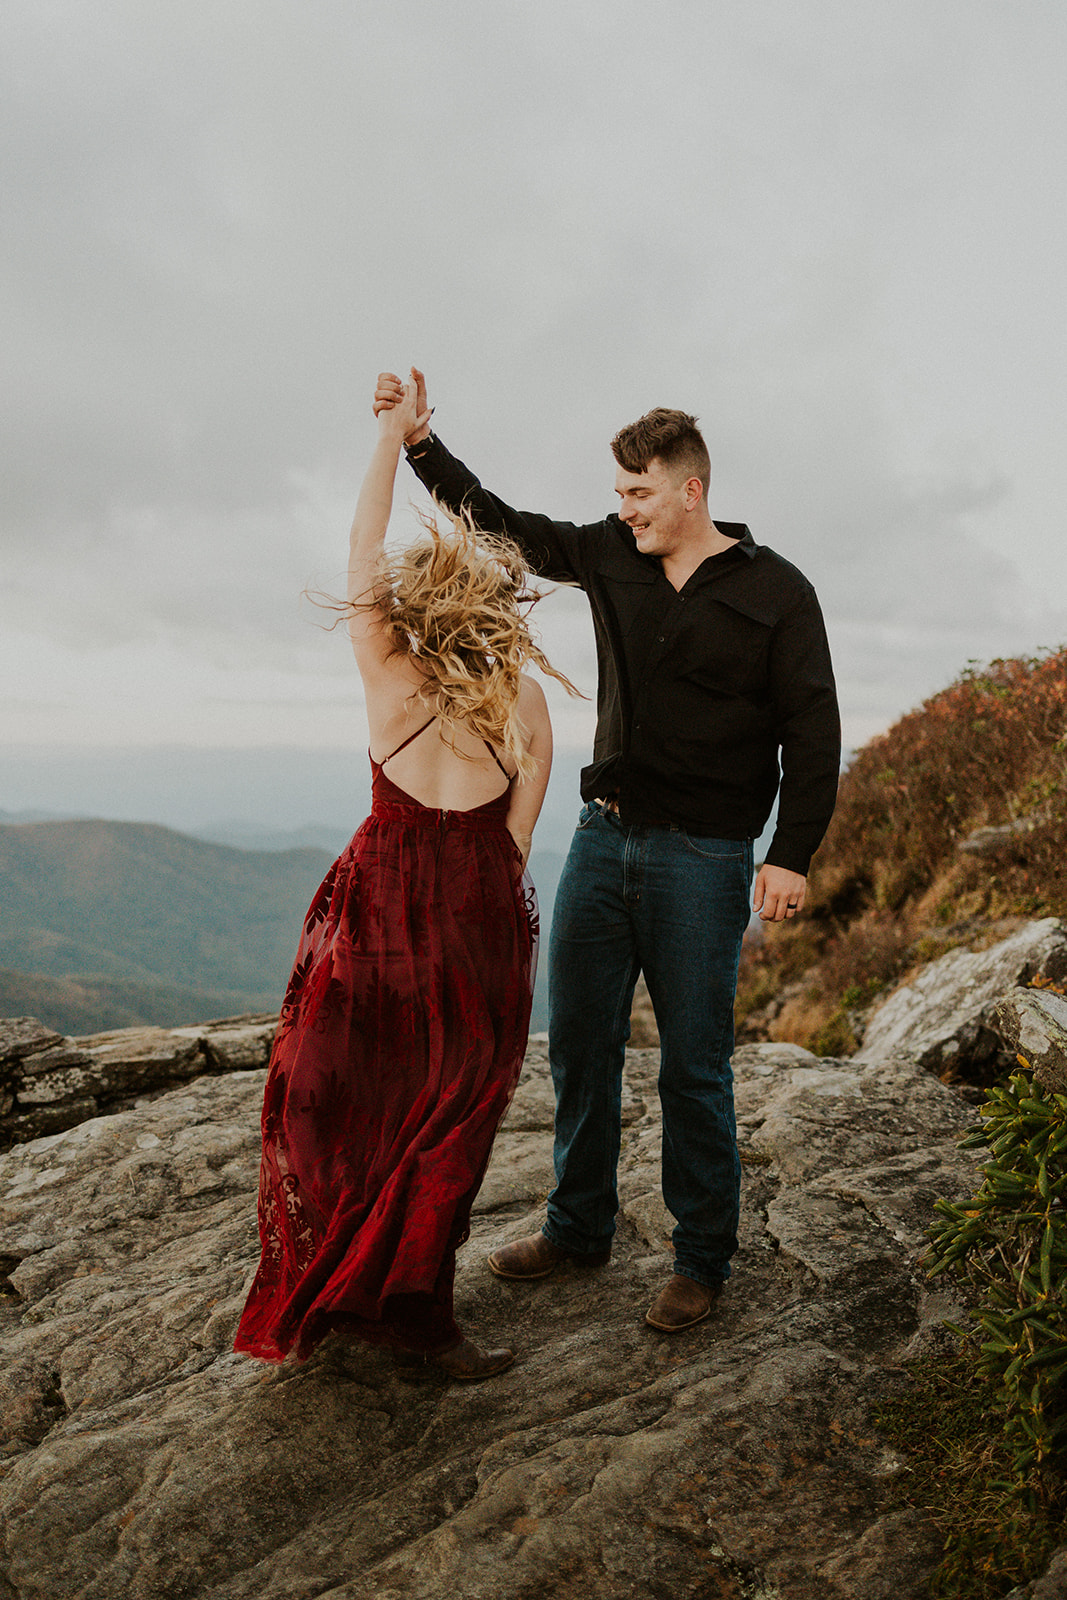 the couple dancing in the wind on the top of the mountain